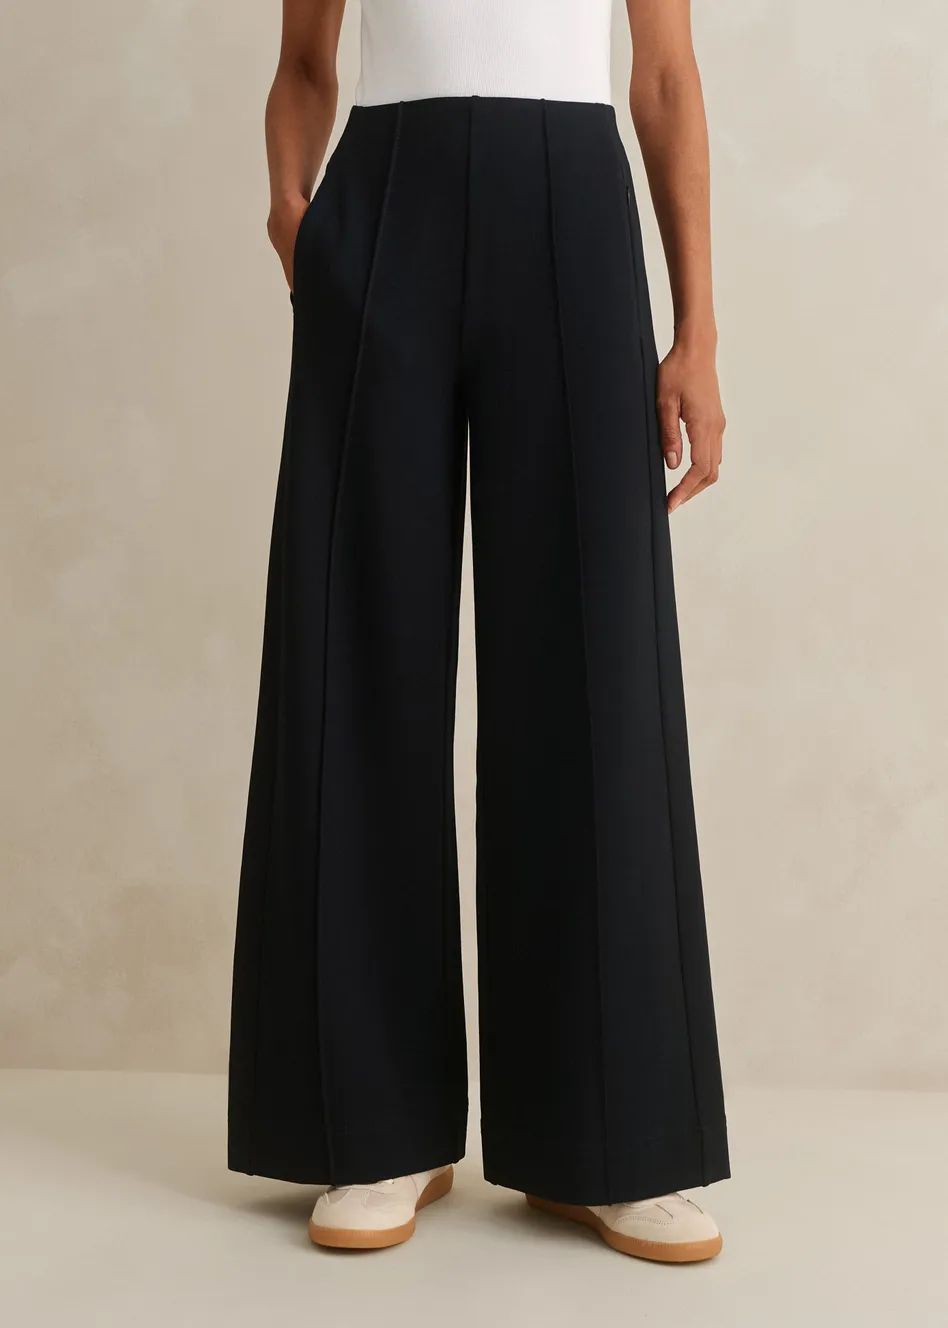 Short Length Travel Tailoring Palazzo | ME+EM Global (Excluding US)